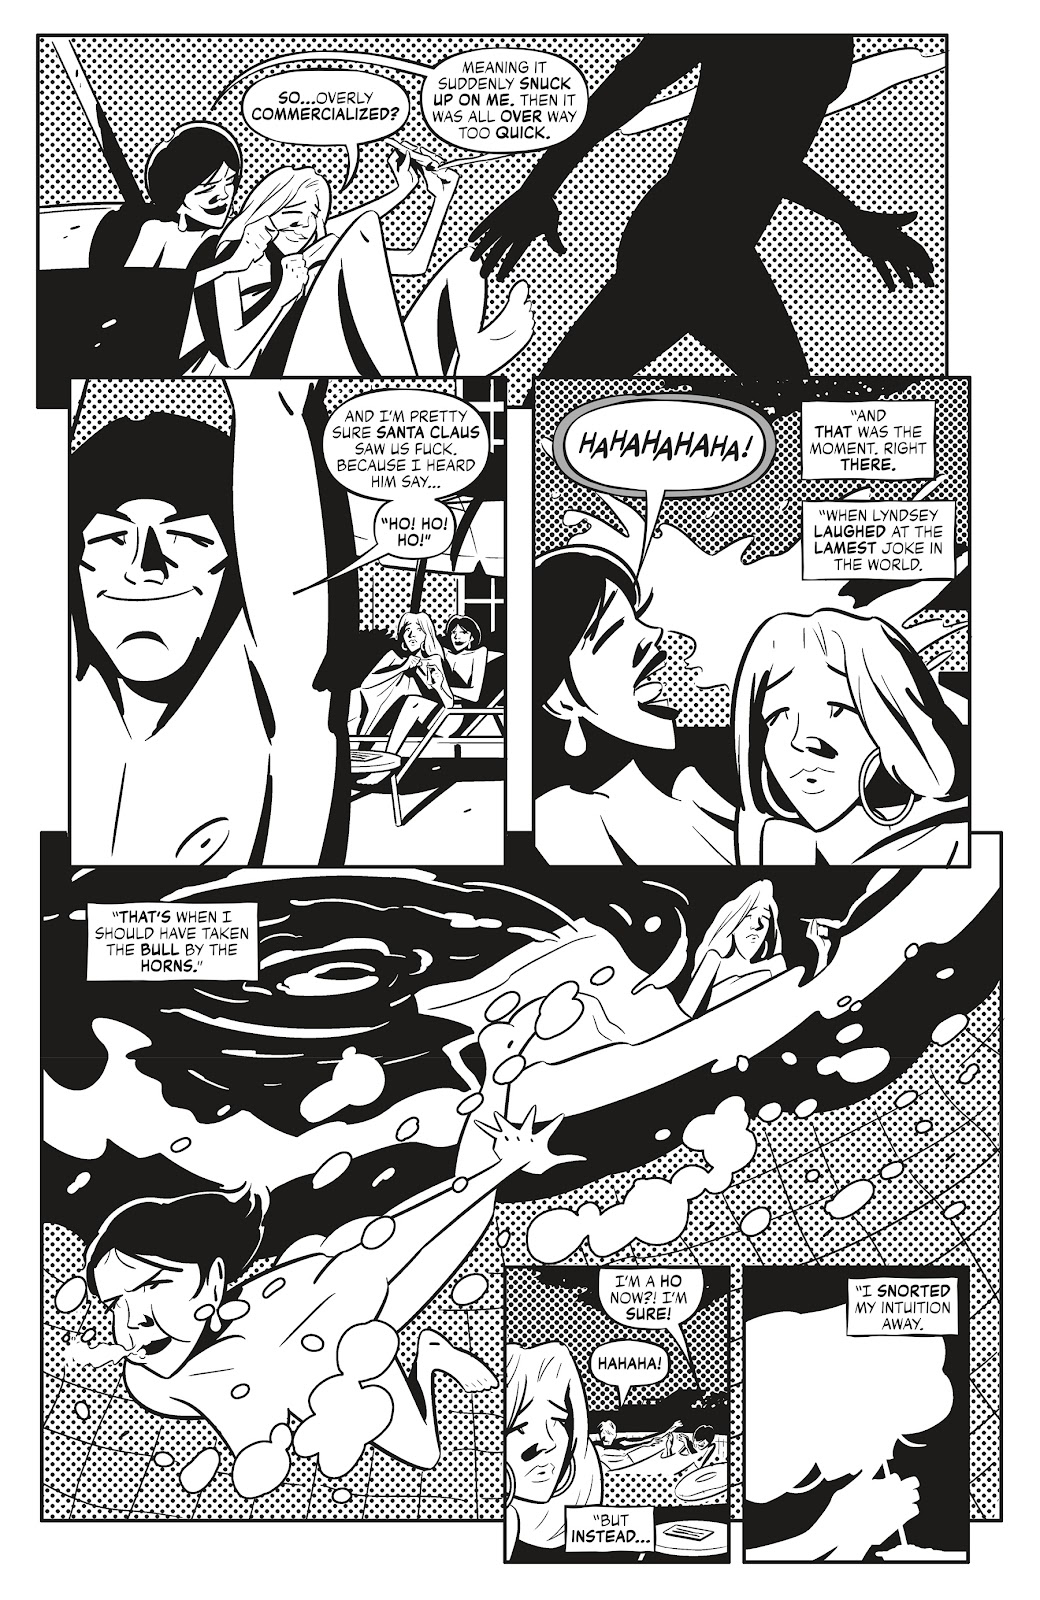 Quick Stops Vol. 2 issue 2 - Page 6